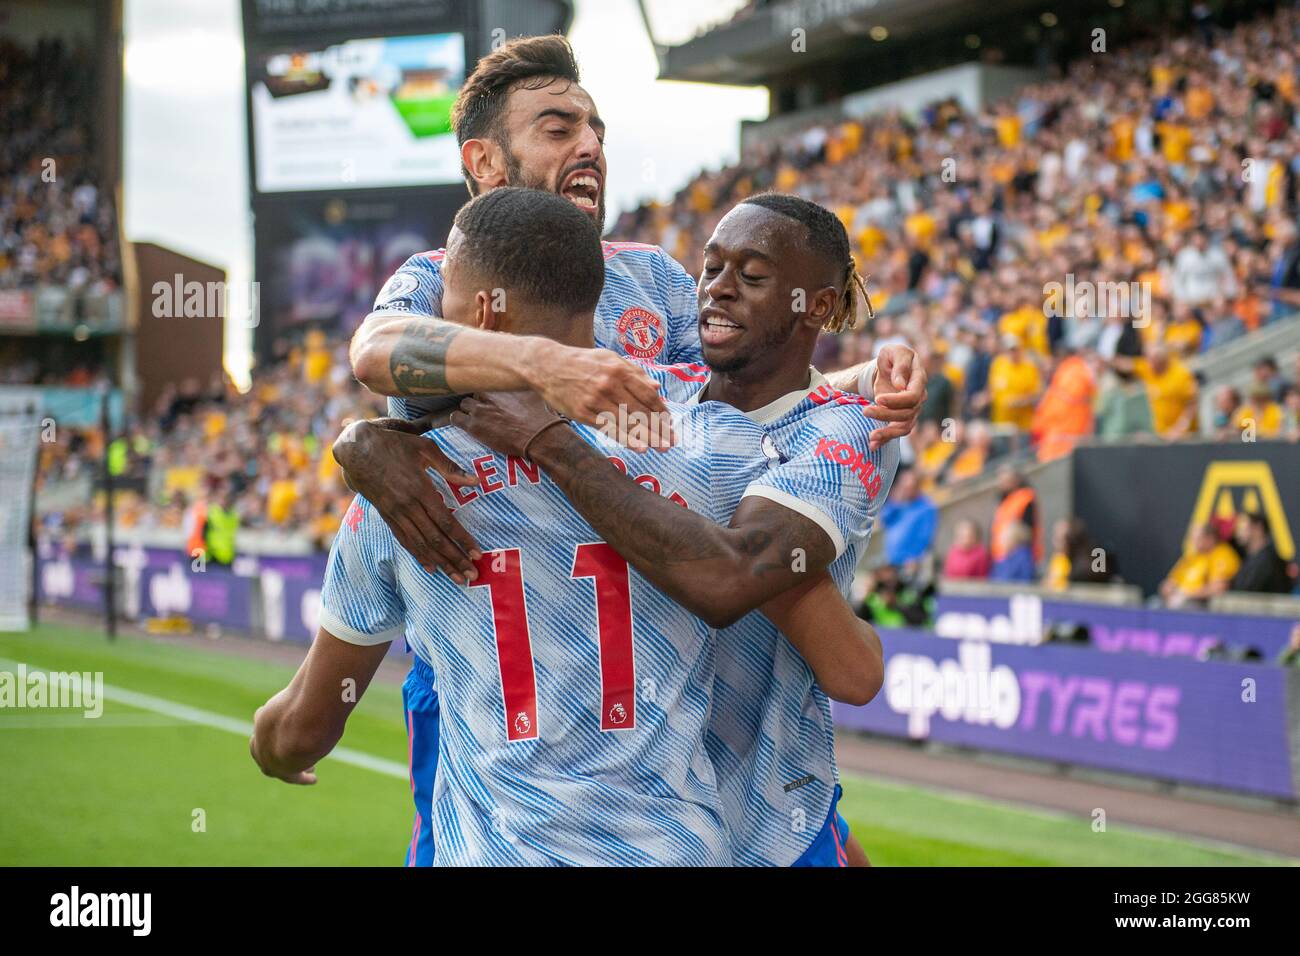 WOLVERHAMPTON, ENGLAND - AUGUST 29: Mason Greenwood of Manchester United celebrate with  Aaron Wan-Bissaka, Bruno Fernandes after scoring goal during Stock Photo